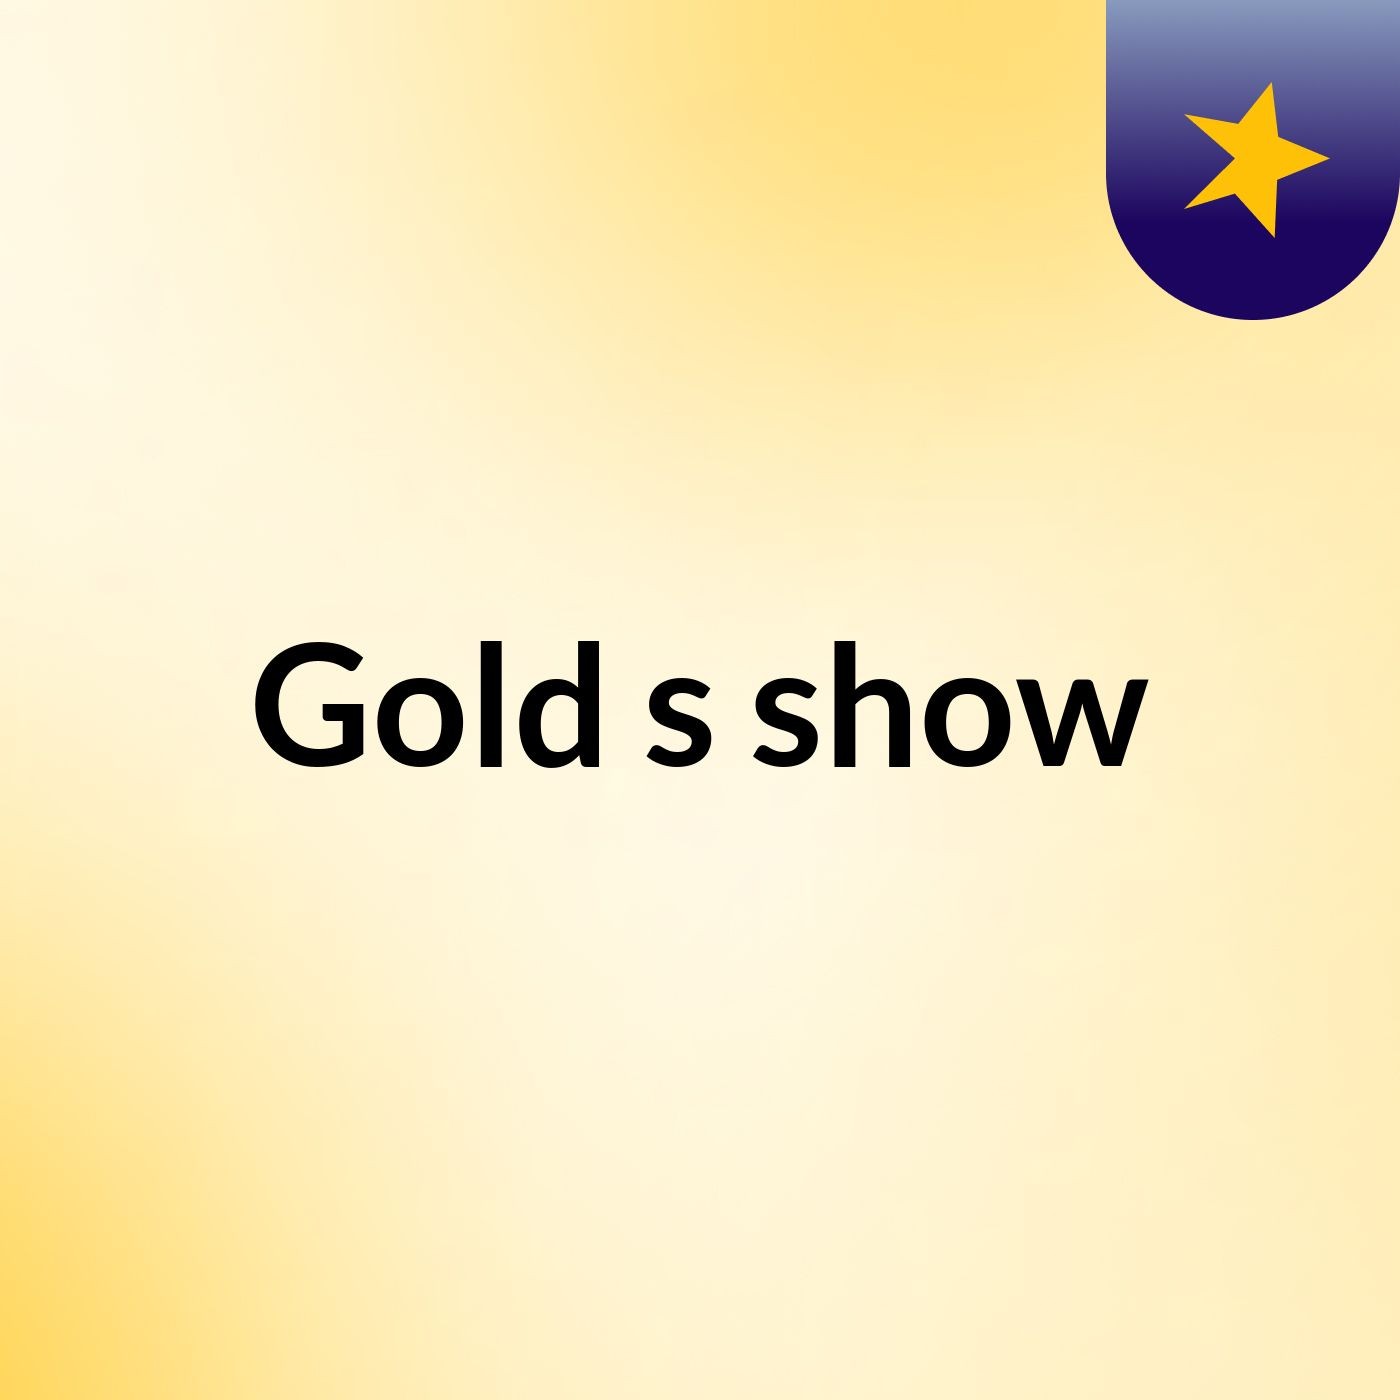 Gold's show